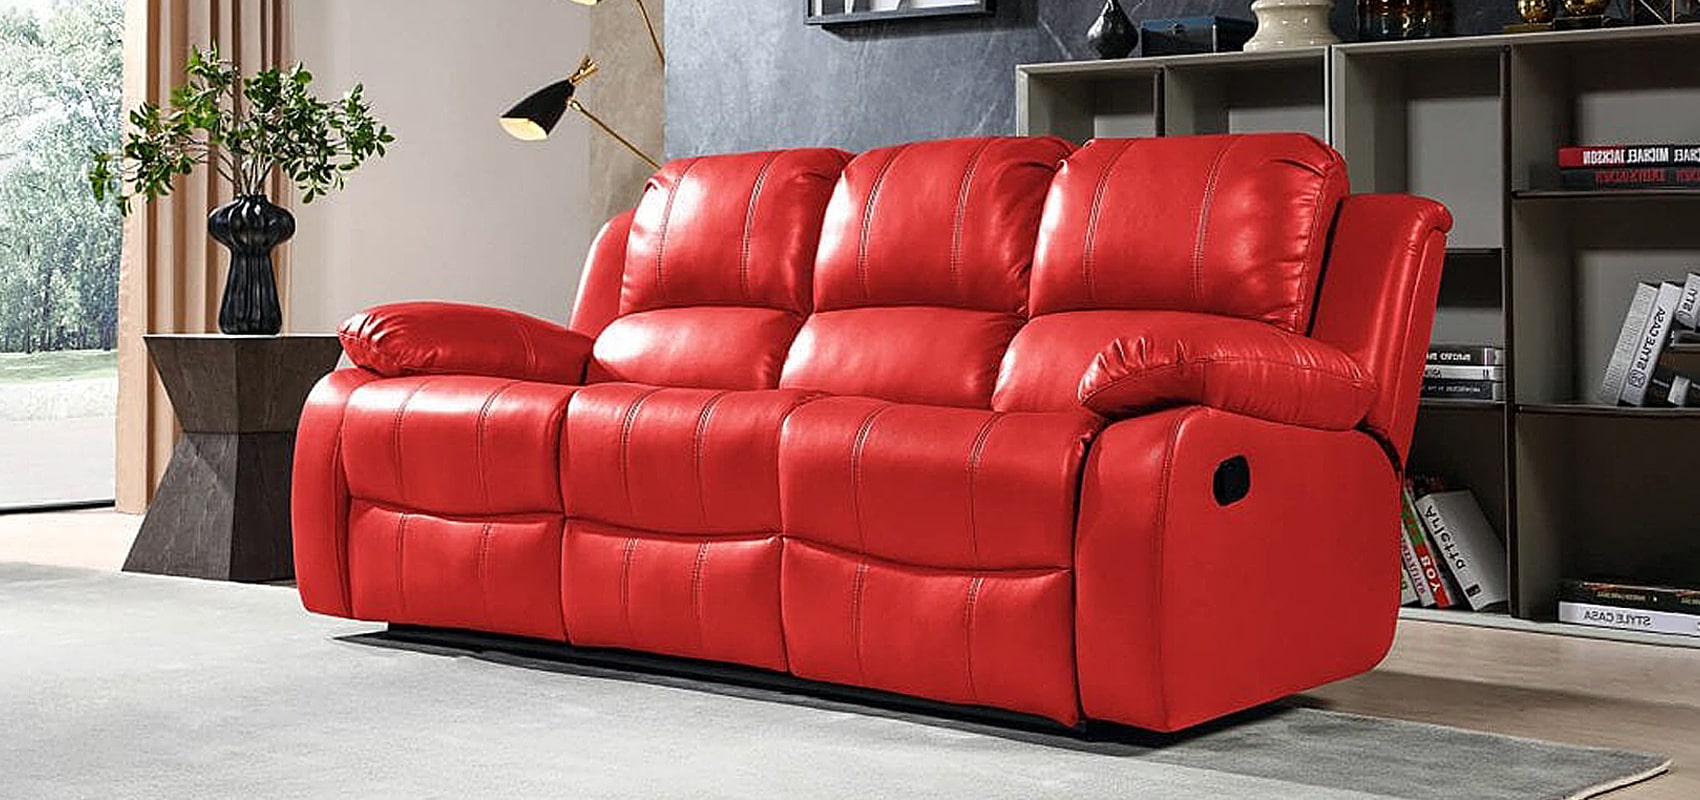 Red Sofa Recliner: Ultimate Comfort and Style Combined